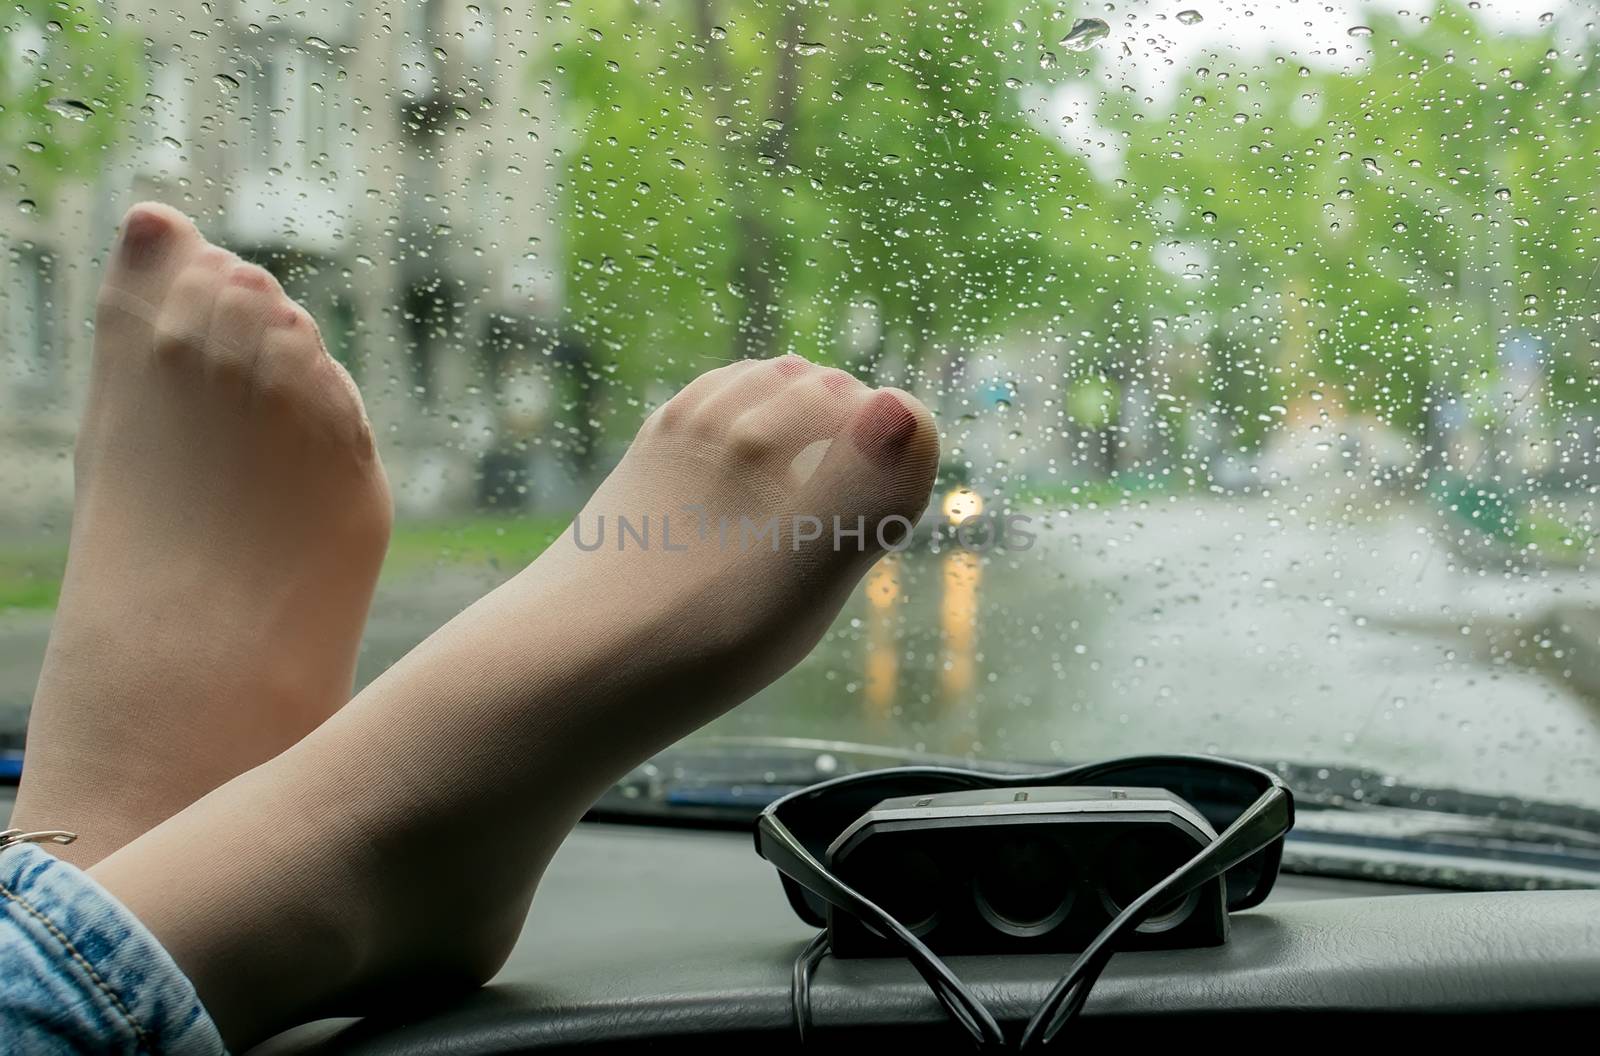 female feet in jeans, tights and with painted nails lie on the panel of the car against the wet windshield on the background of the street